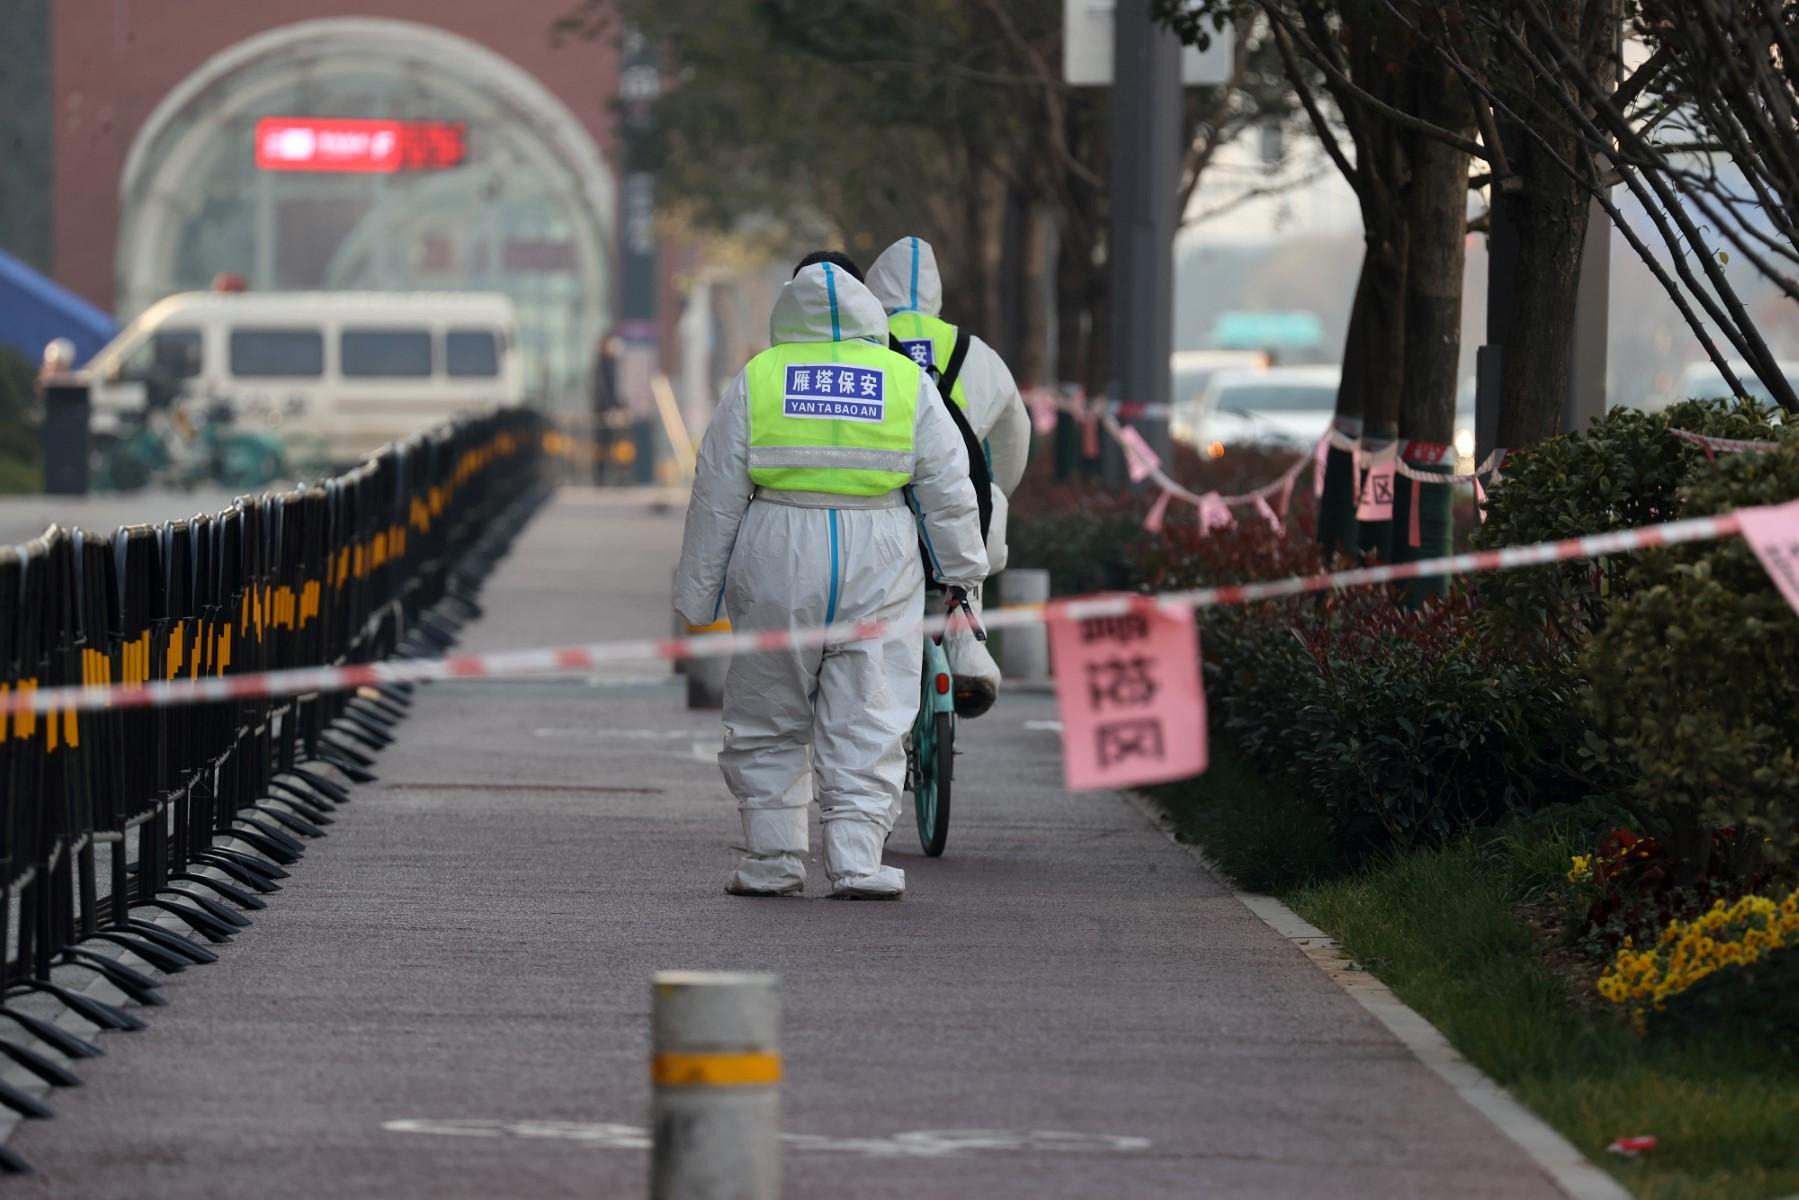 This photo taken on Dec 22 shows security guards walking in an area under restrictions following a recent Covid-19 outbreak in Xi'an in China's northern Shaanxi province. Photo: AFP